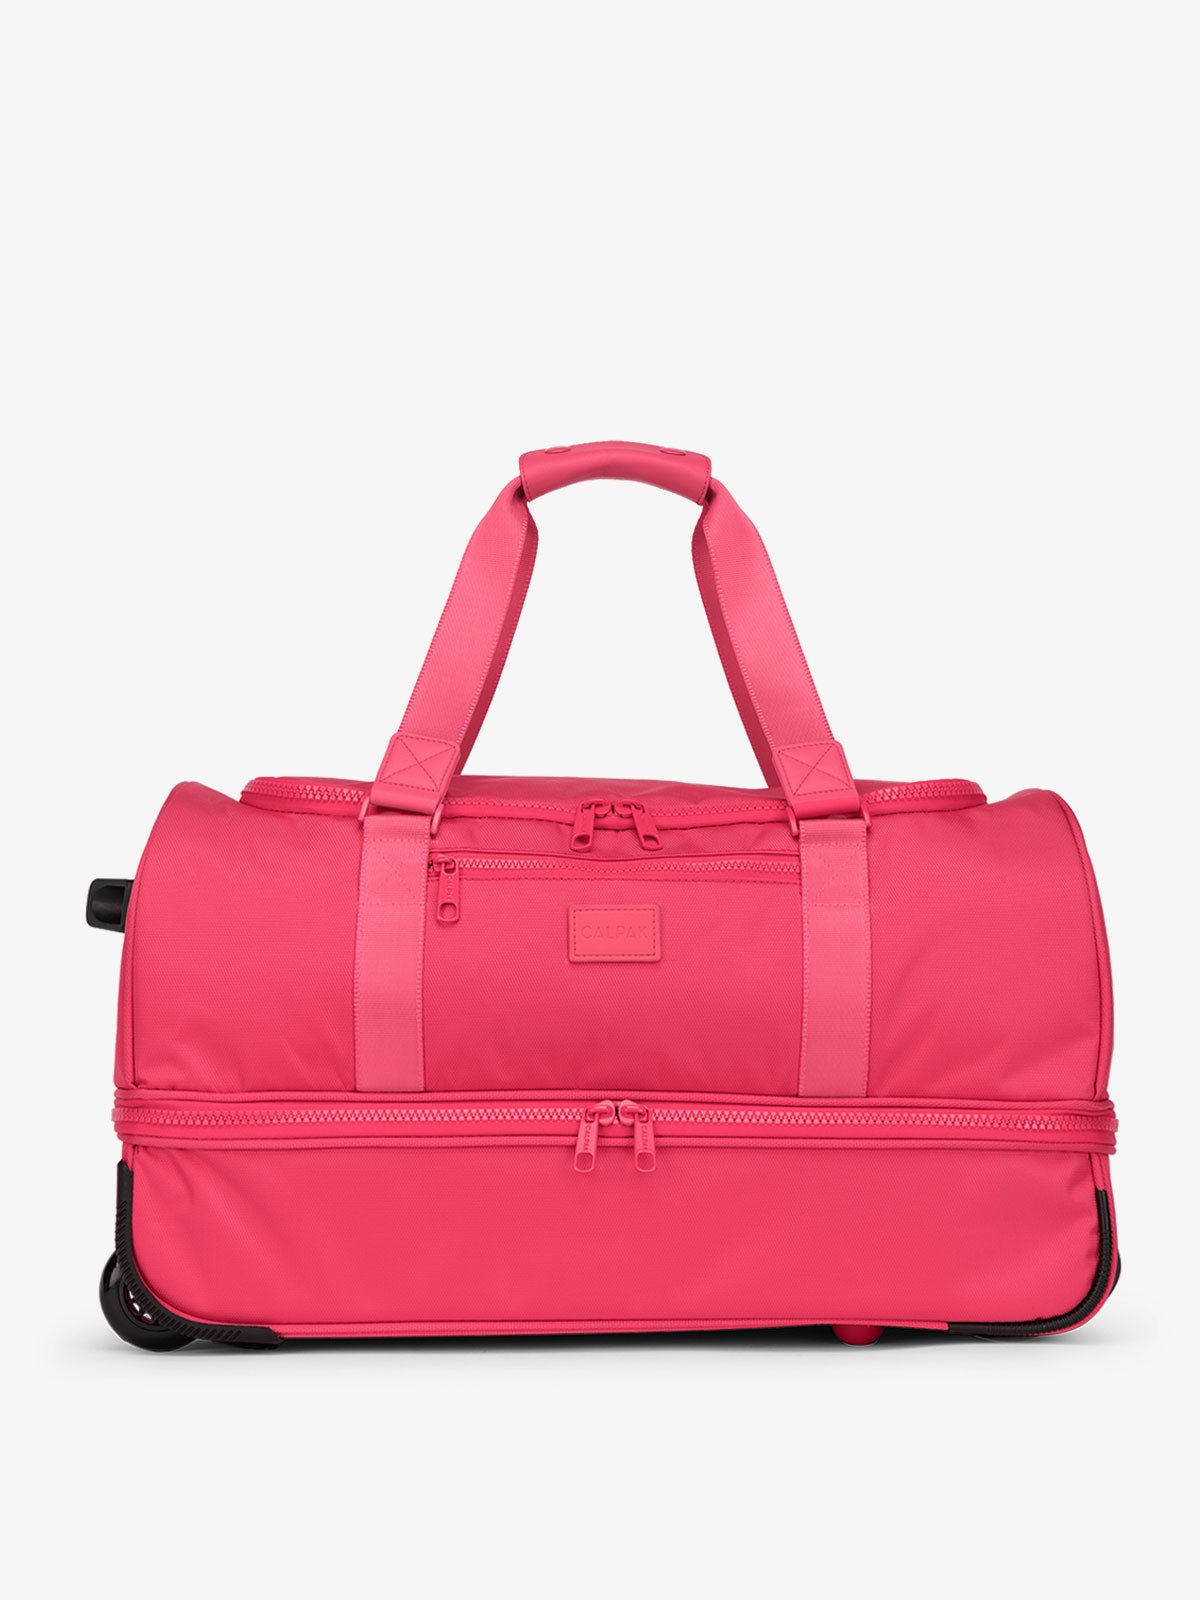 CALPAK Stevyn Rolling Duffel bag with dual top handles and shoe compartment in pink dragonfruit